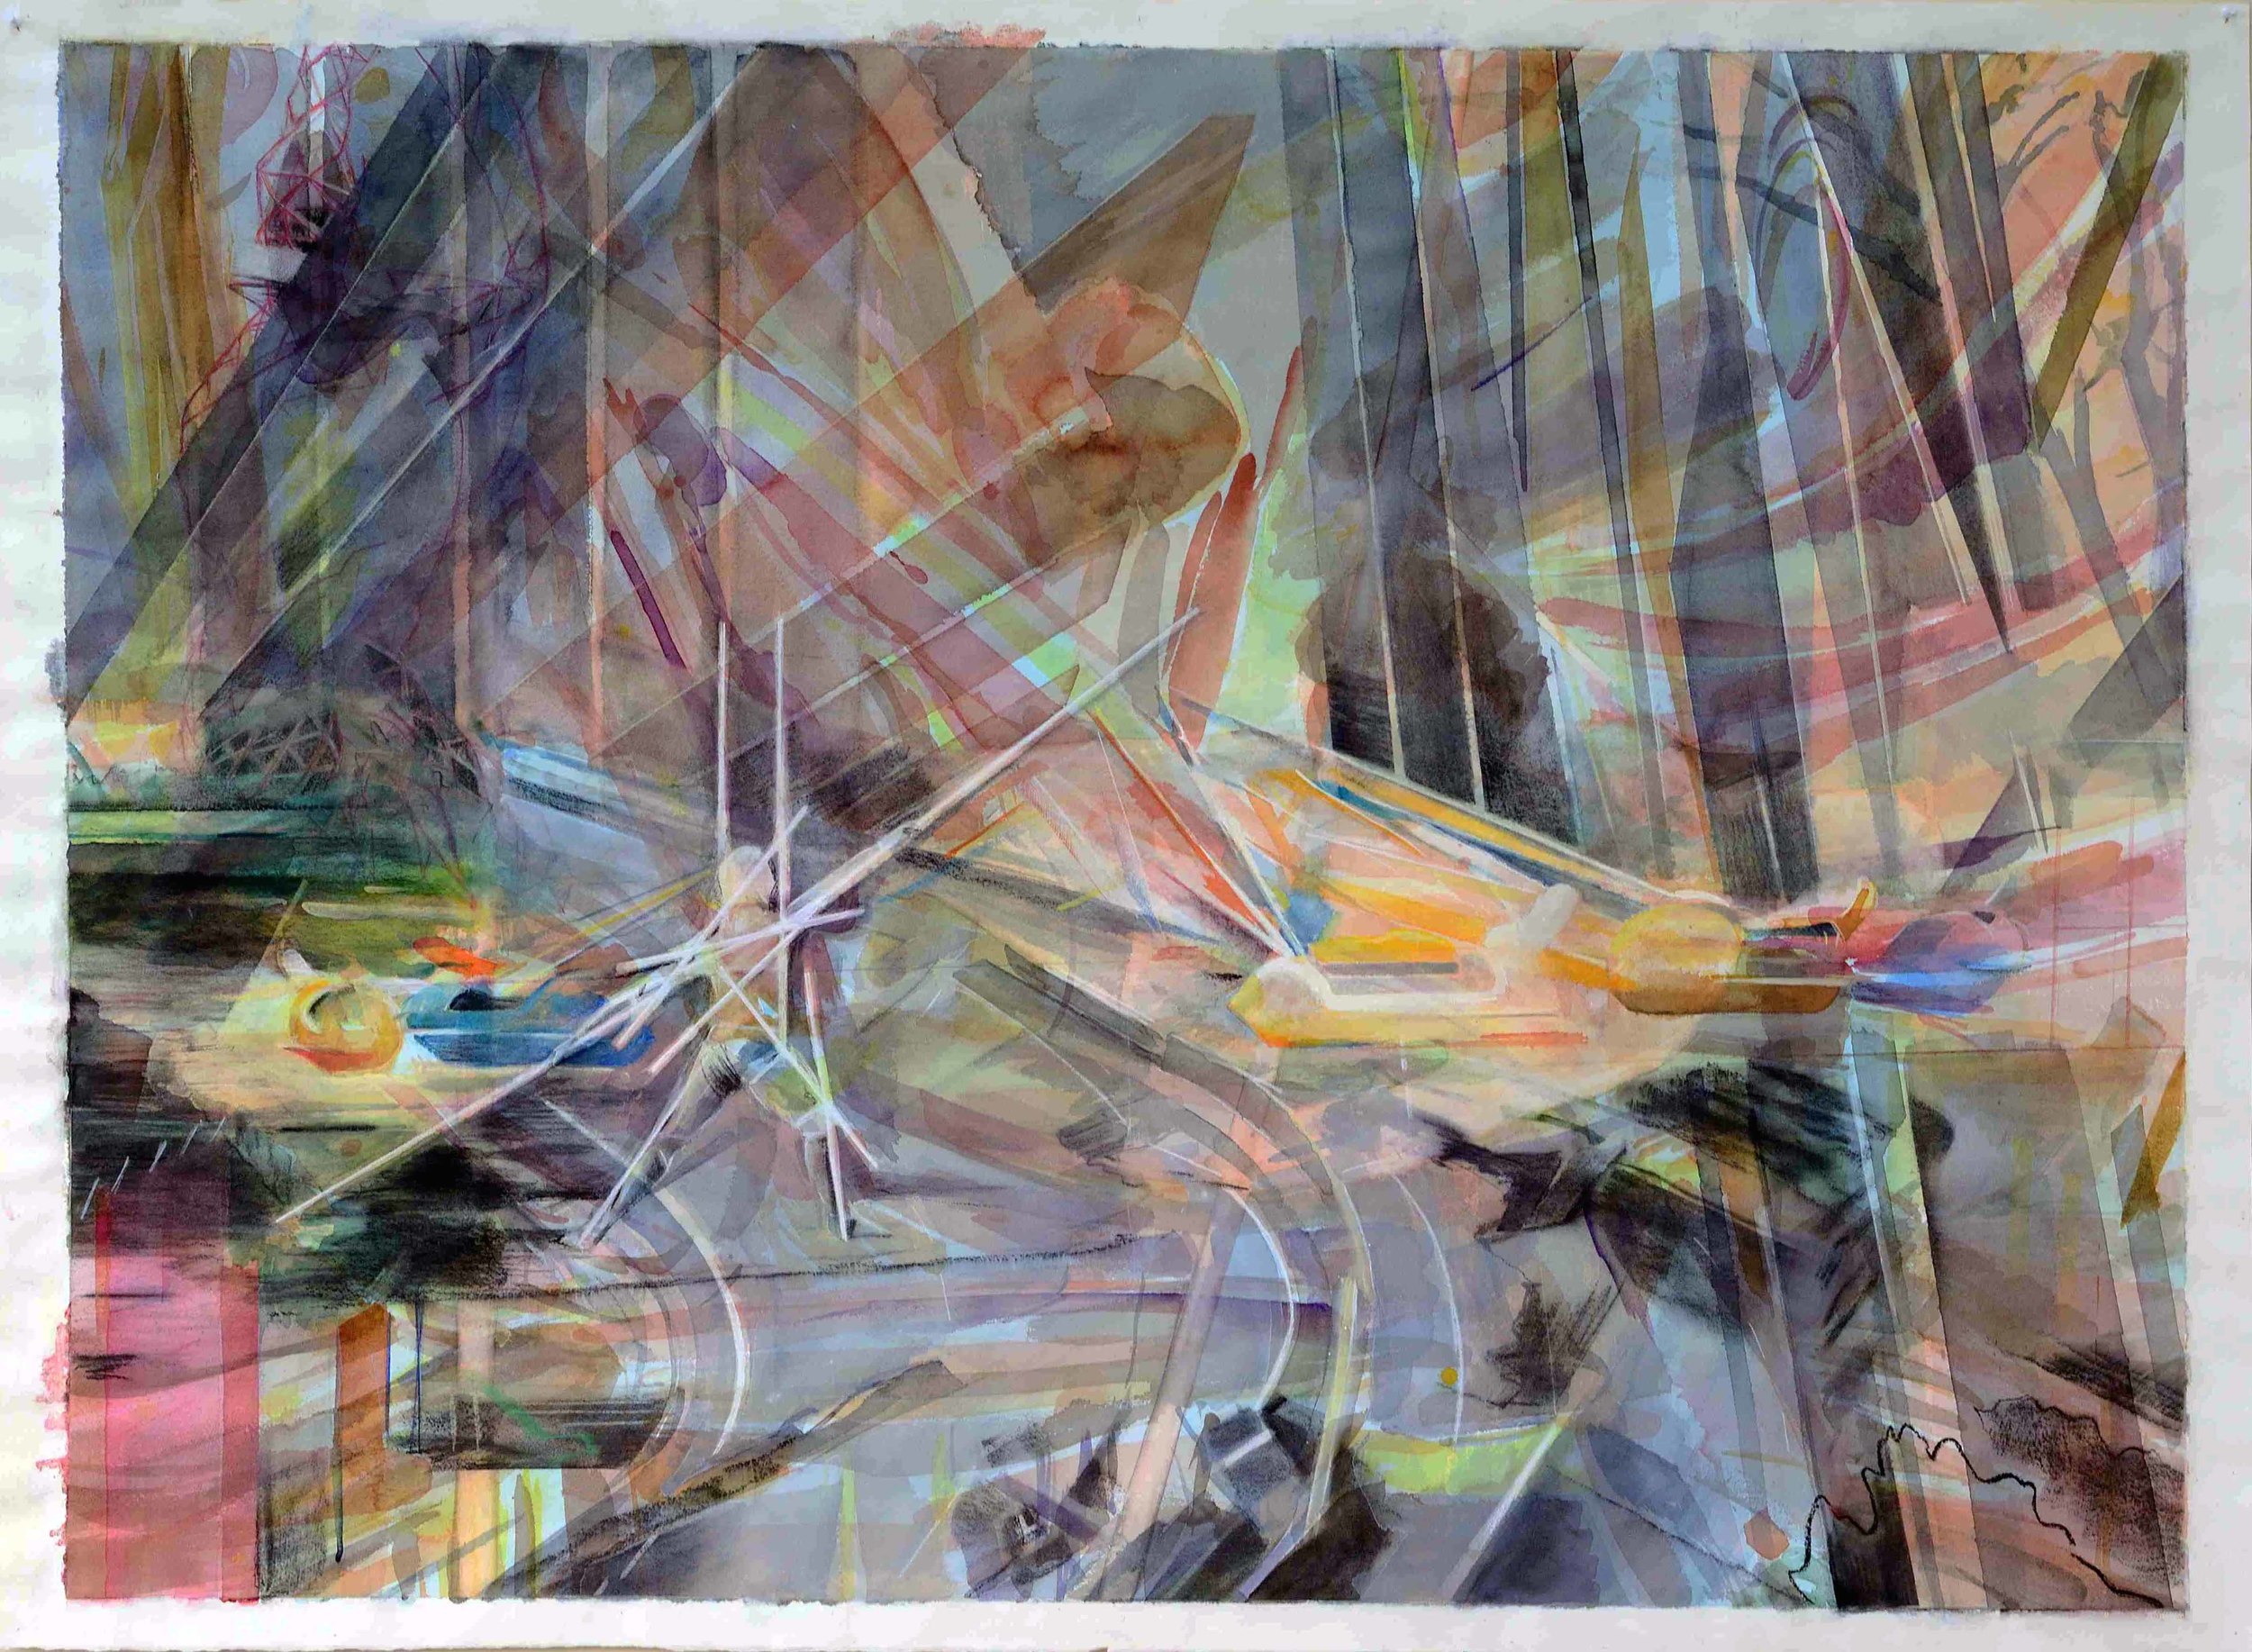   Out of my head , 104 x 140cm, watercolour and charcoal on paper, 2014. Private collection, France 